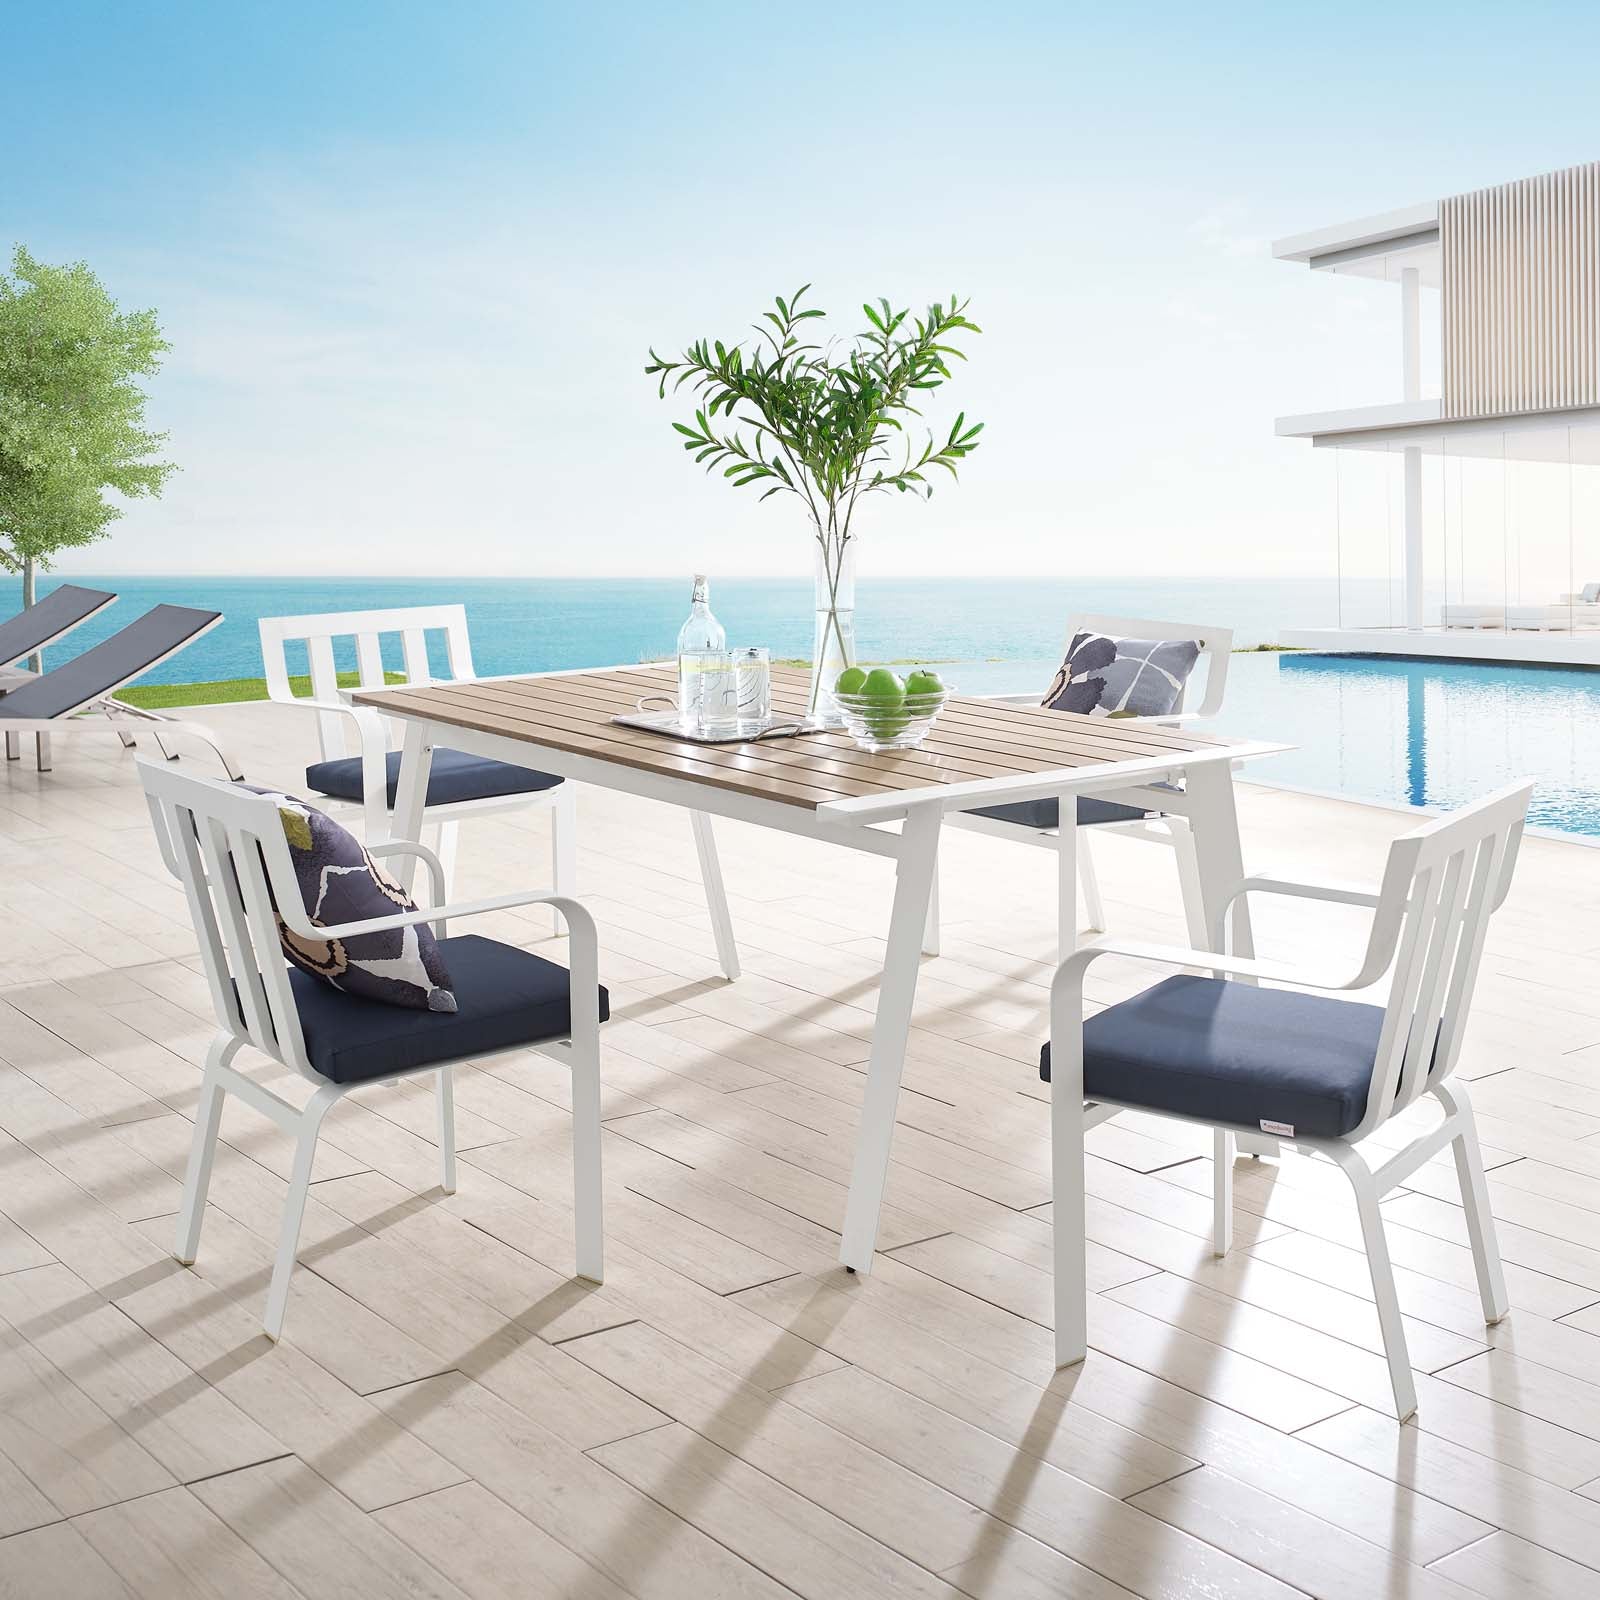 Modway Outdoor Dining Sets - Baxley 5 Piece Outdoor Patio Aluminum Dining Set White Navy